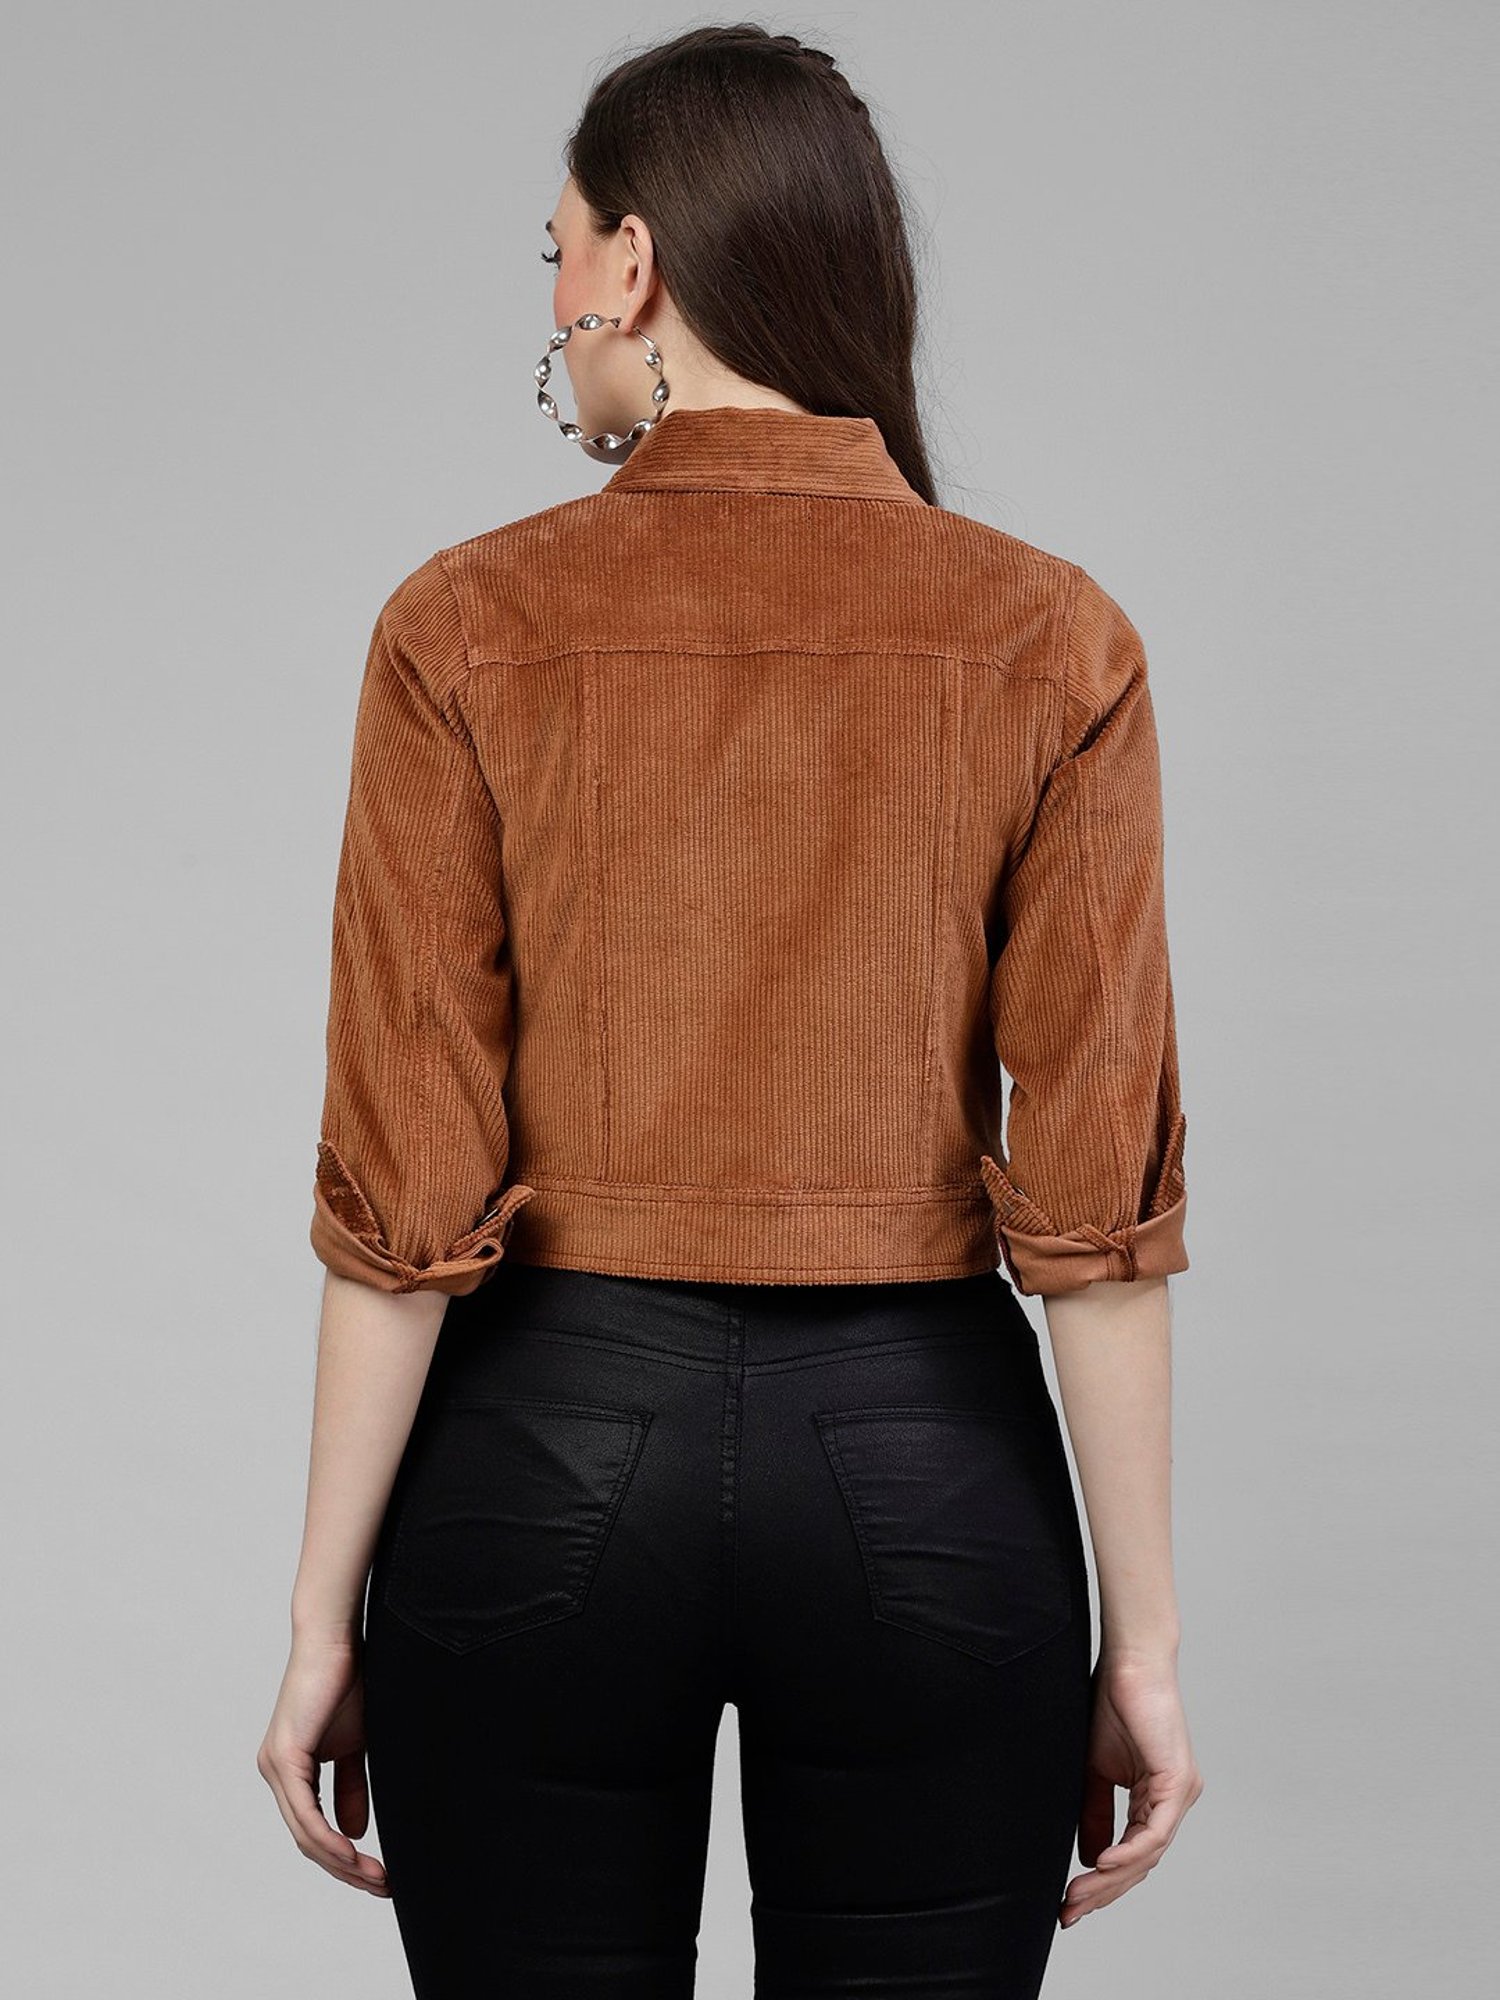 Buy Rust Jackets & Coats for Women by TALES & STORIES Online | Ajio.com